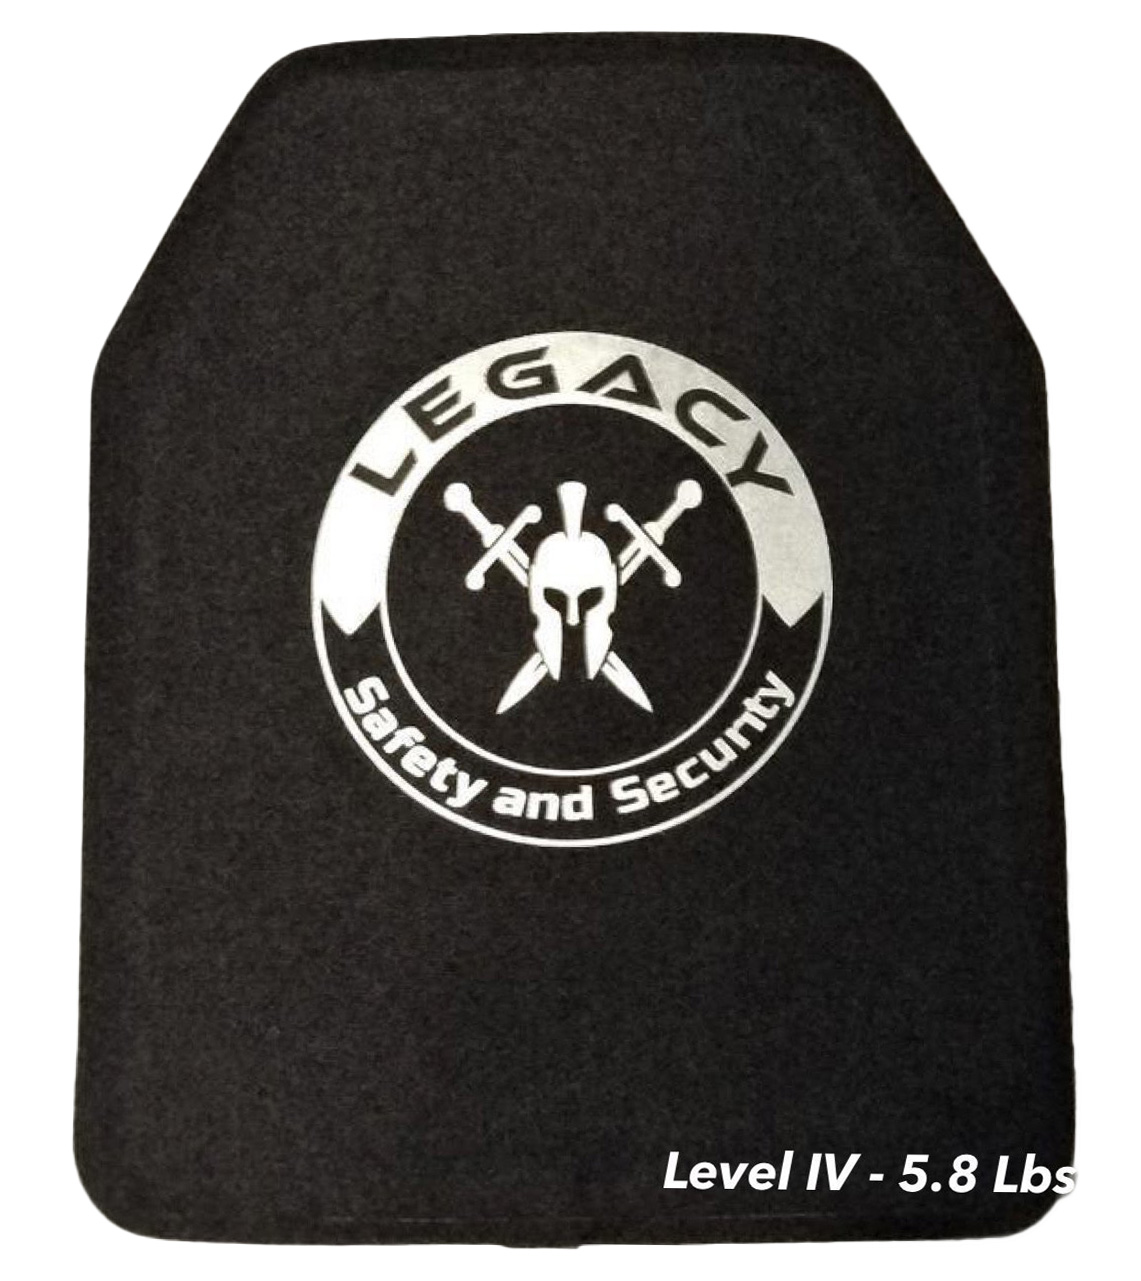 Level 4 / Level IV Rifle Rated Body Armor Plates - Premier Body Armor